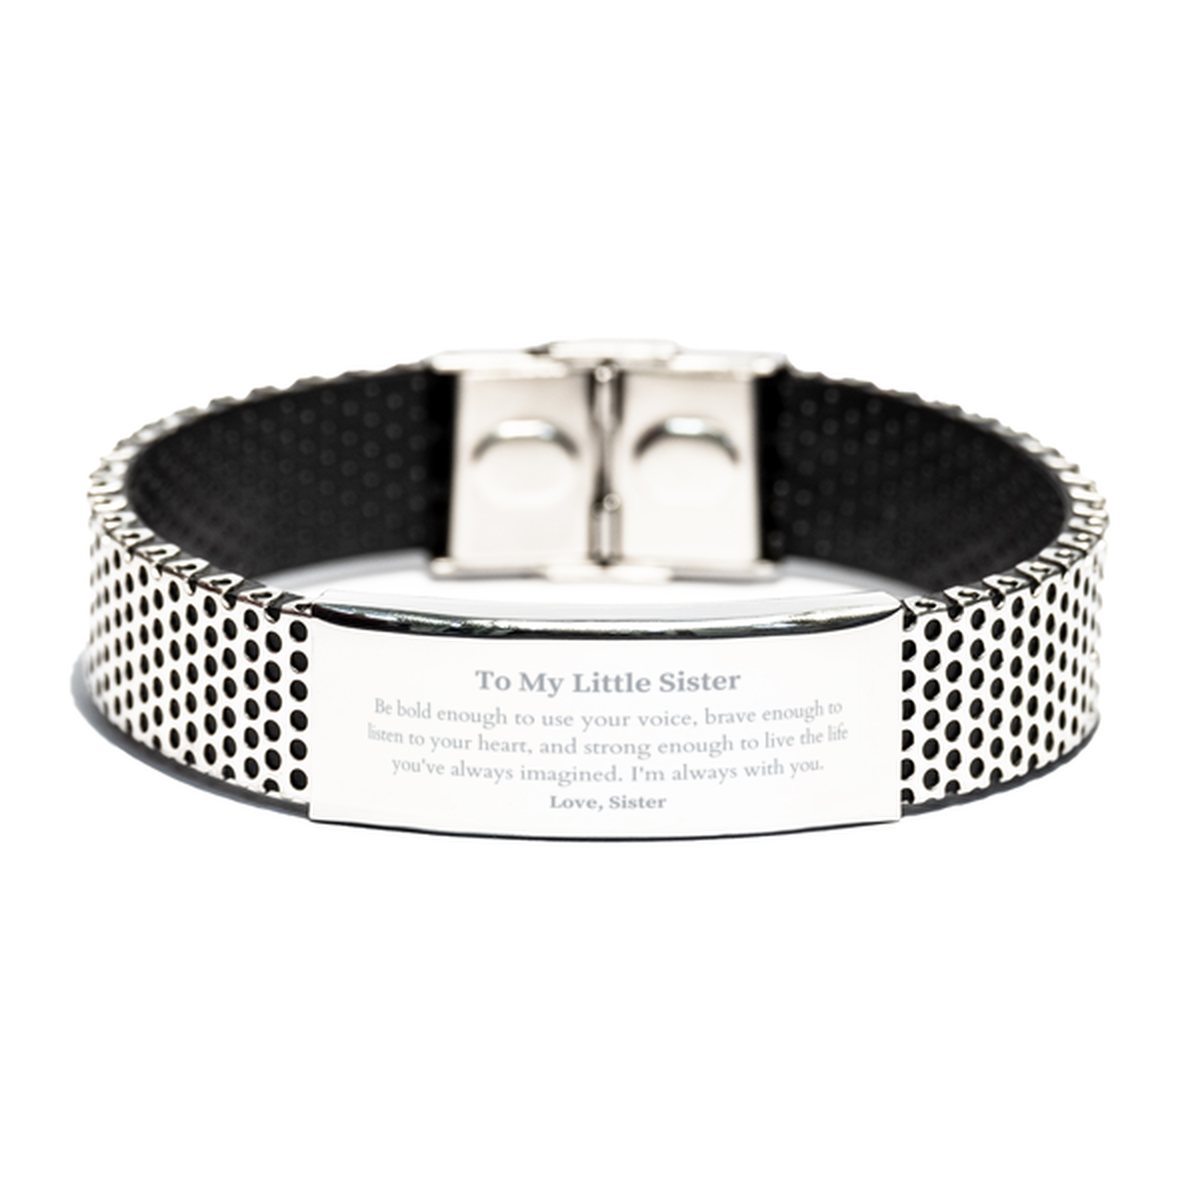 Keepsake Little Sister Stainless Steel Bracelet Gift Idea Graduation Christmas Birthday Little Sister from Sister, Little Sister Be bold enough to use your voice, brave enough to listen to your heart. Love, Sister